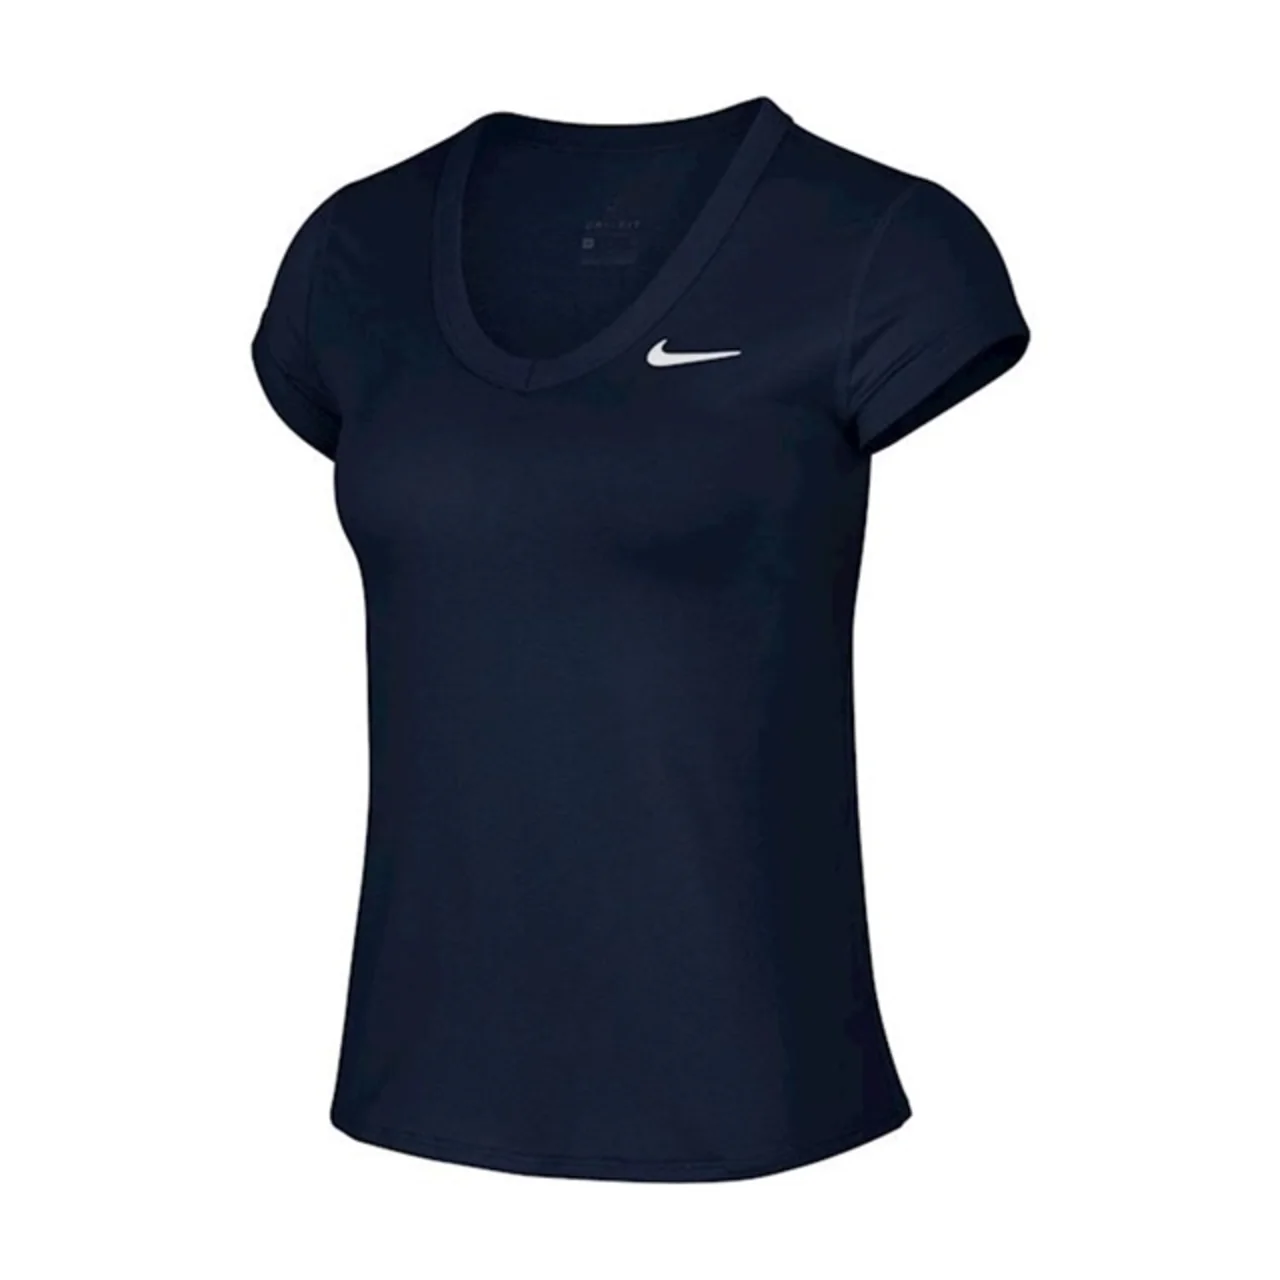 Nike Dry Court Top Navy